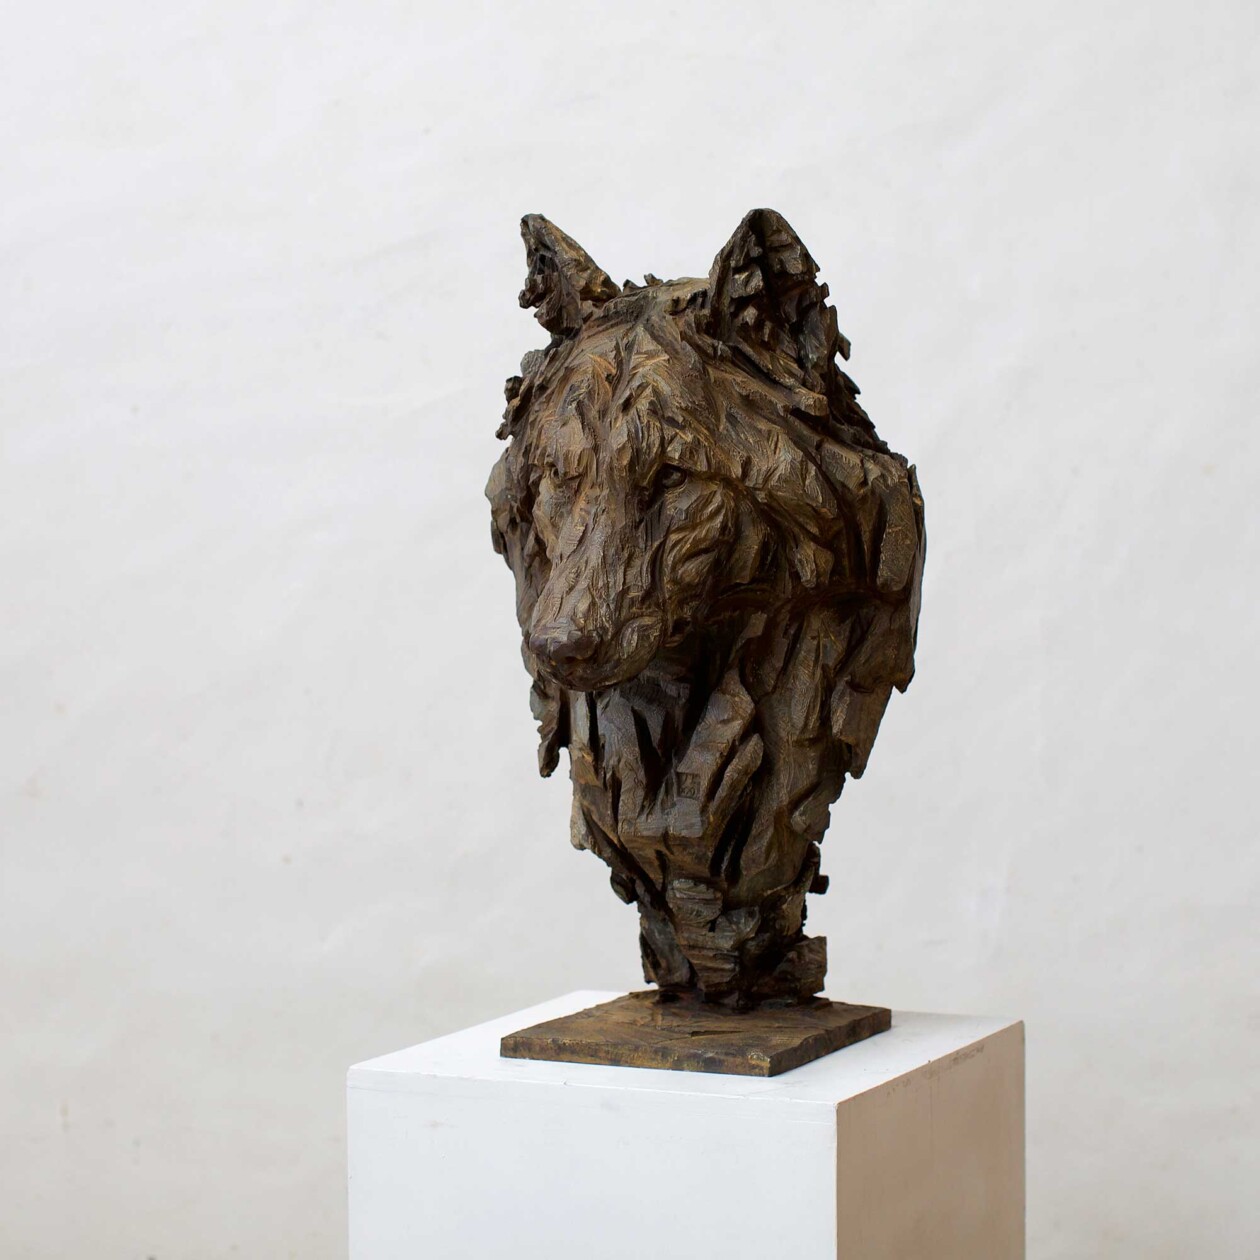 Jürgen Lingl Hand Carves Precise And Textured Figurative Sculptures From Wood (2)